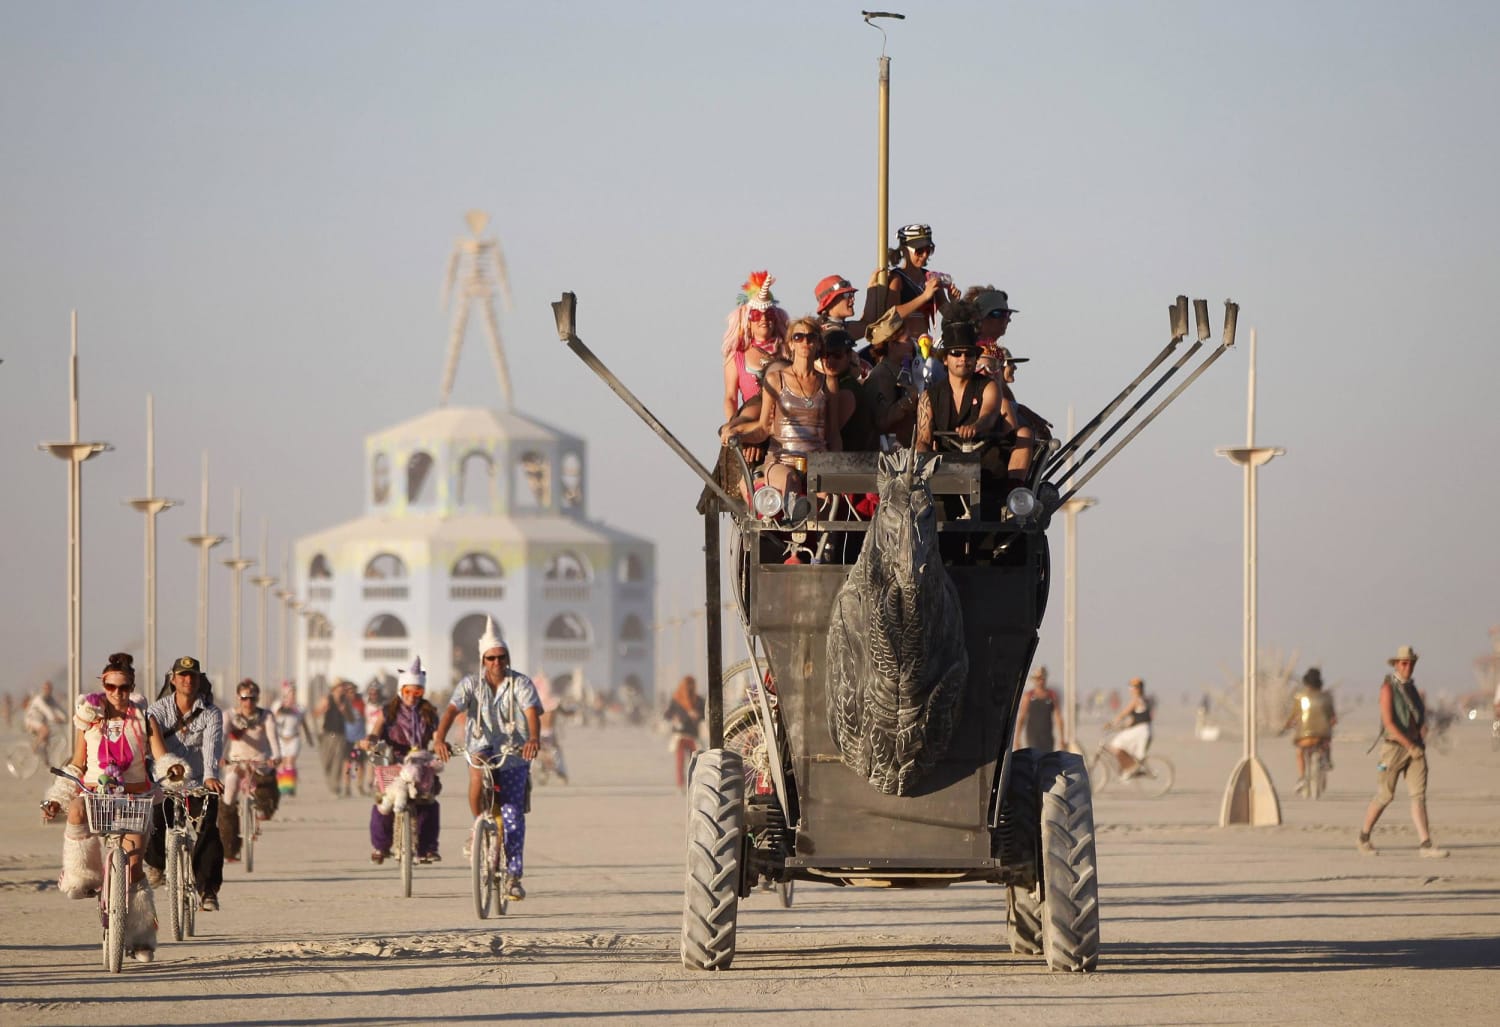 Burning Man Organizers Open Financial Books After Nonprofit Transition